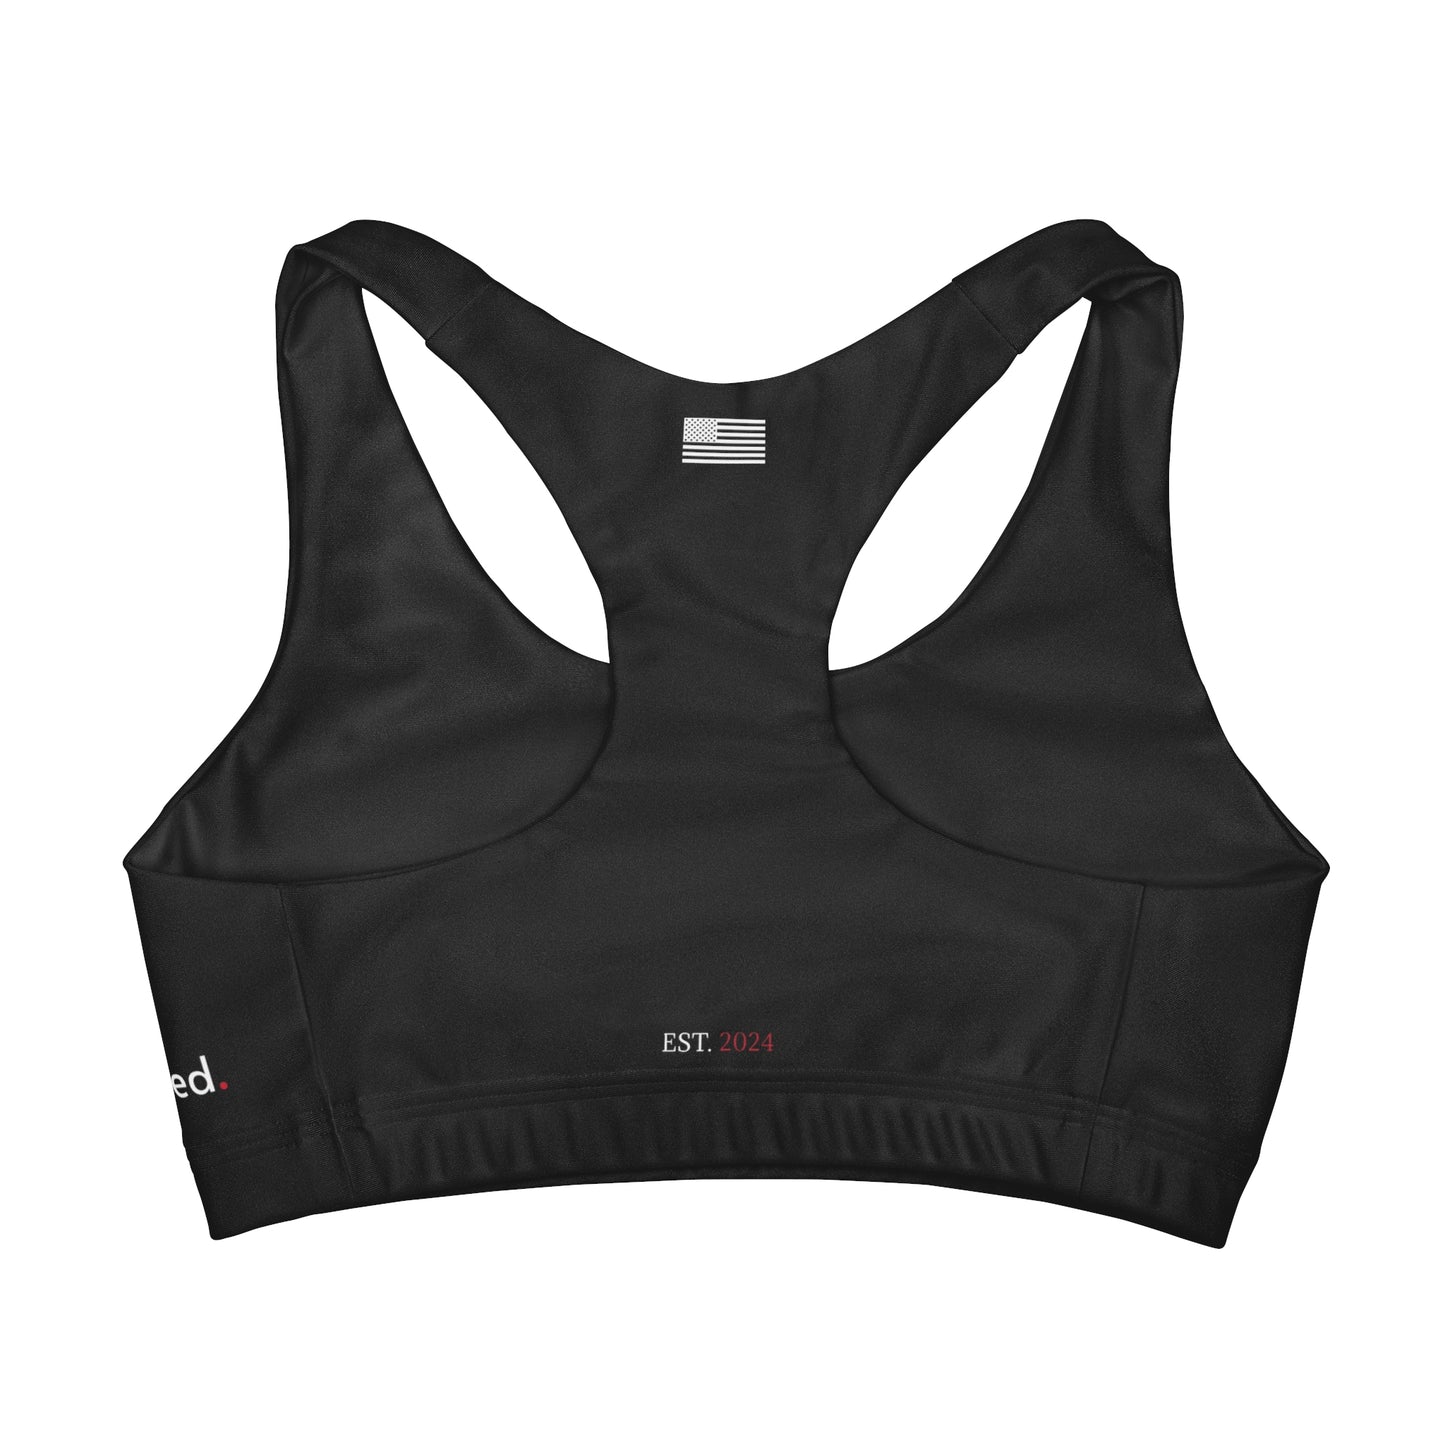 2Bdiscontinued. girls' double lined seamless sports bra blk